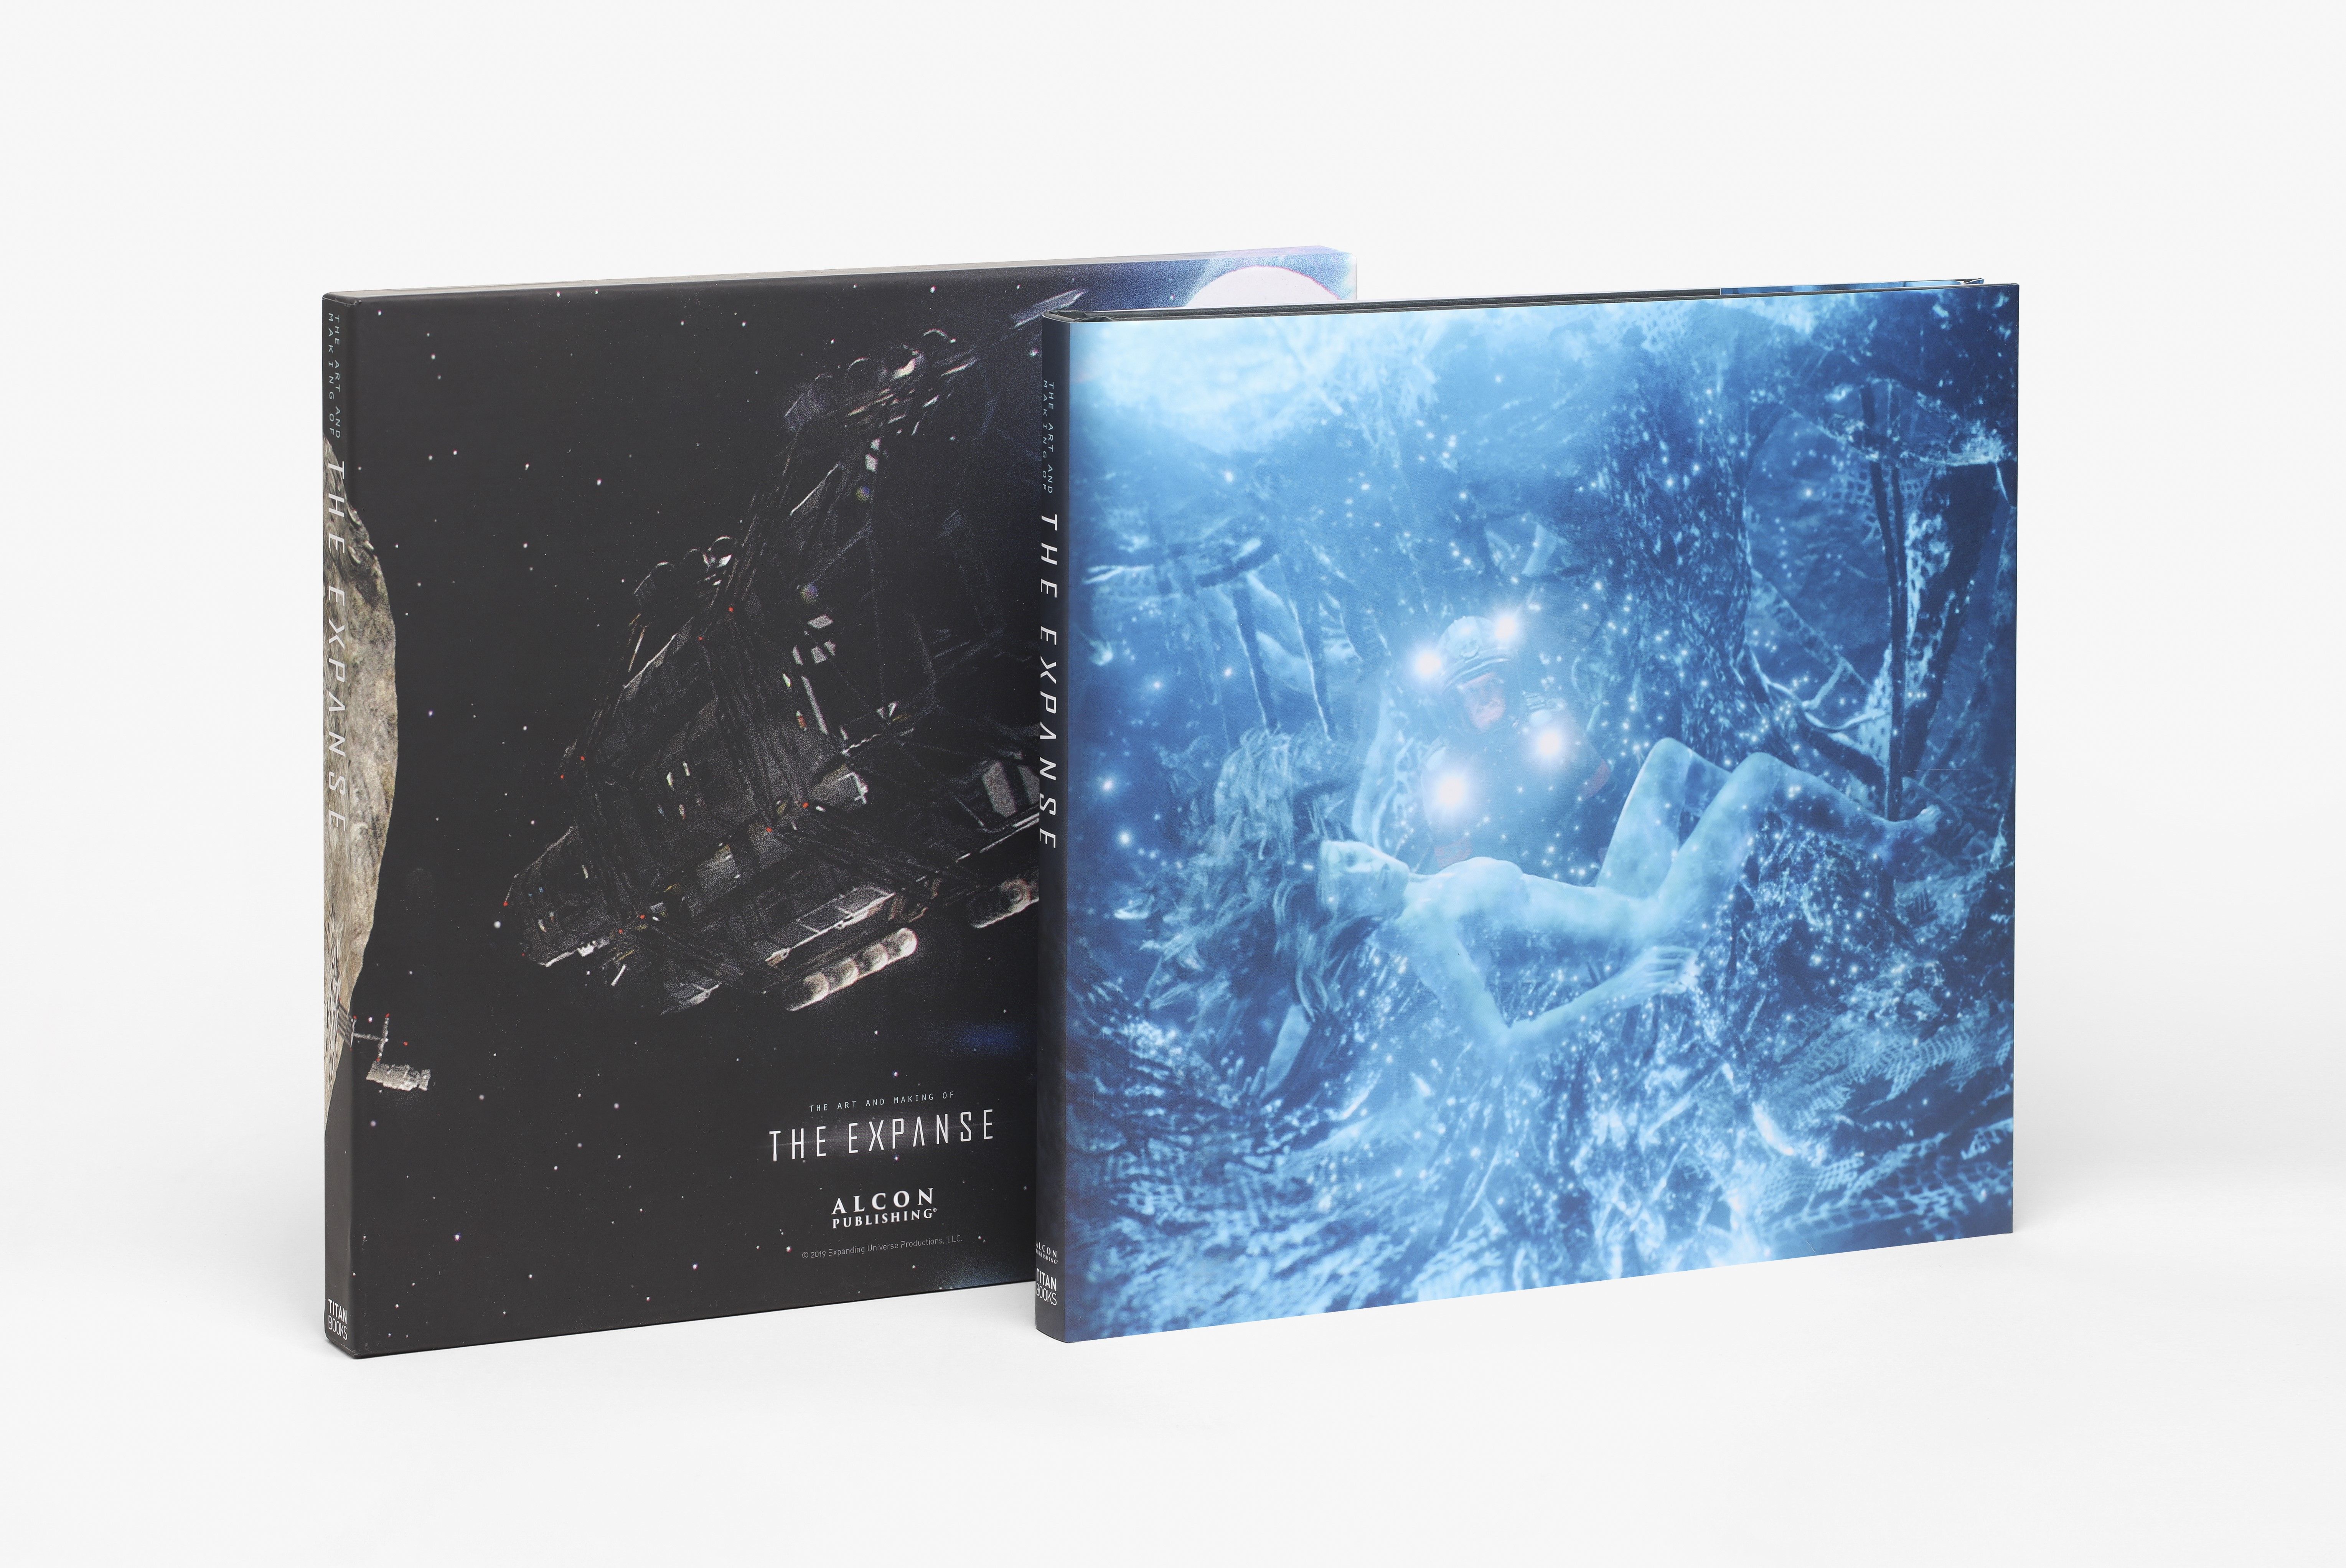 The Expanse Art Book Collector's Edition Images Reveal New Cover